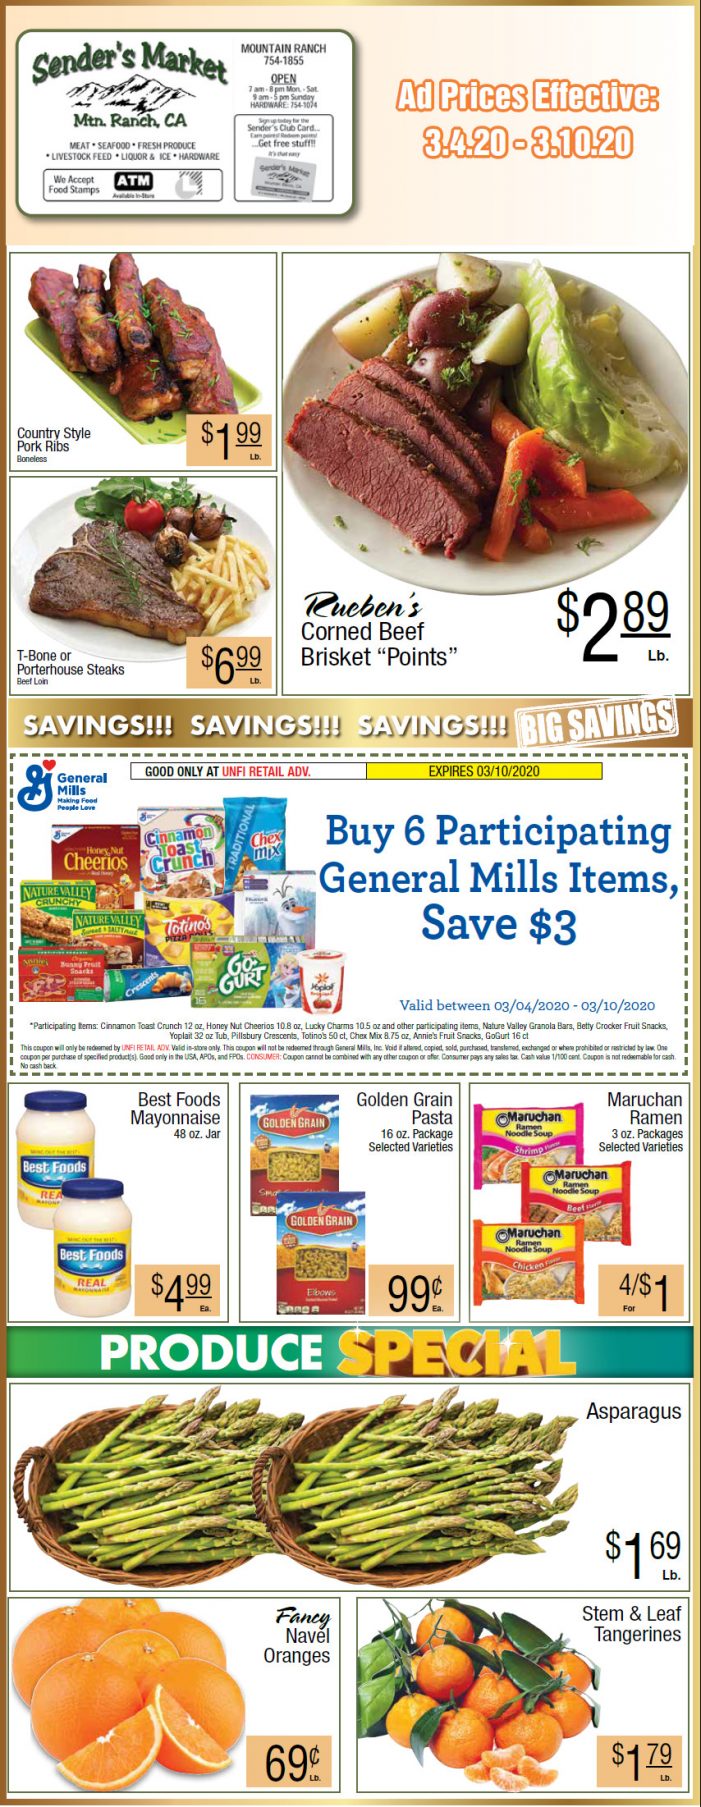 Sender’s Market’s Weekly Ad & Grocery Specials Through March 10th